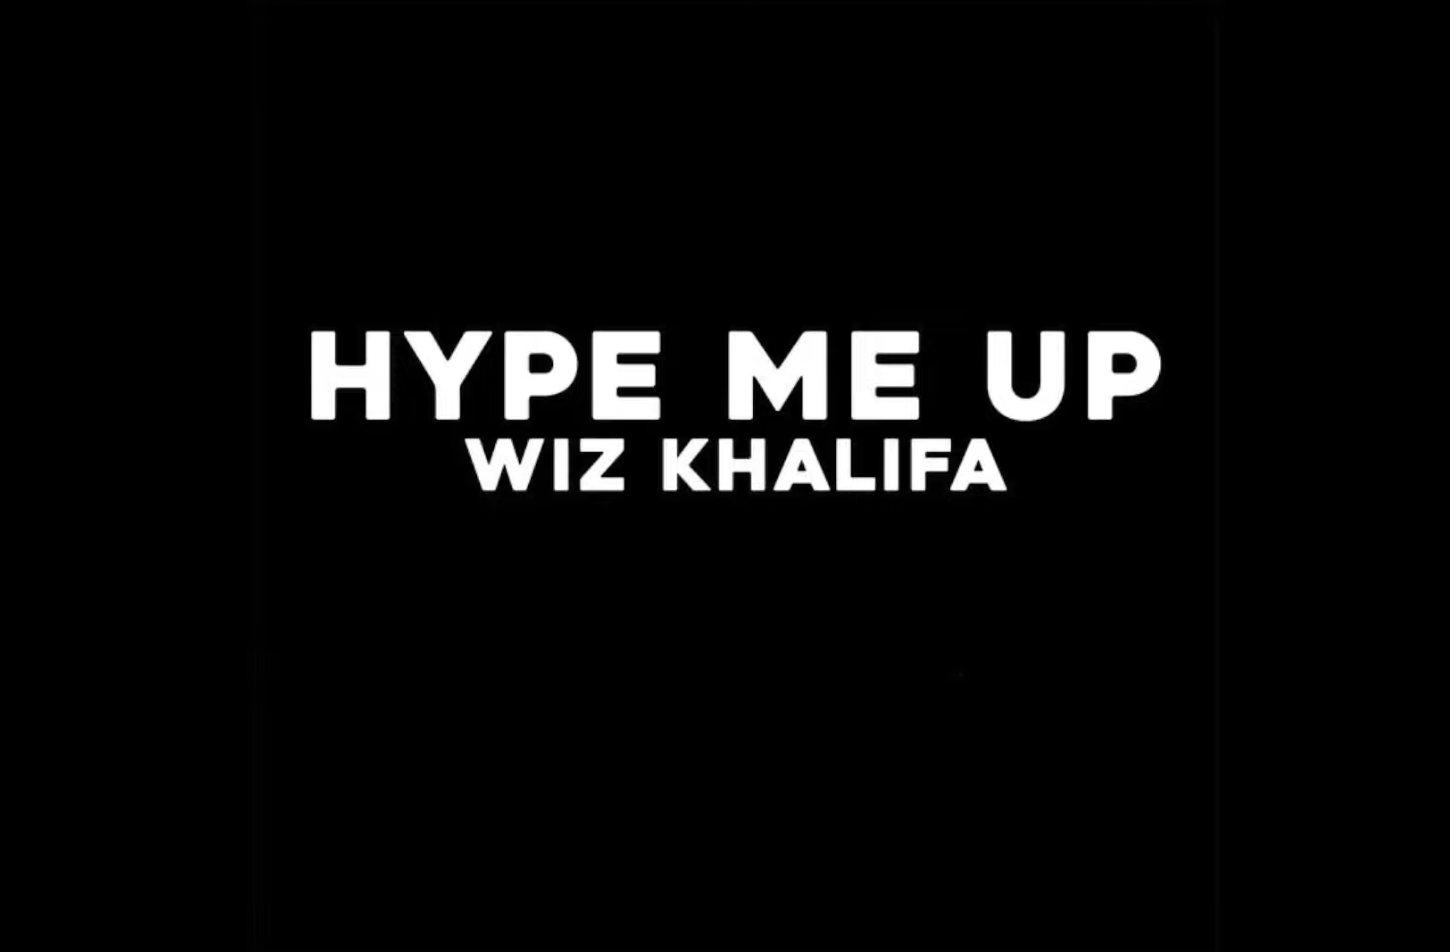 Wiz Khalifa Needs A Confidence Boost On “Hype Me Up”: Stream